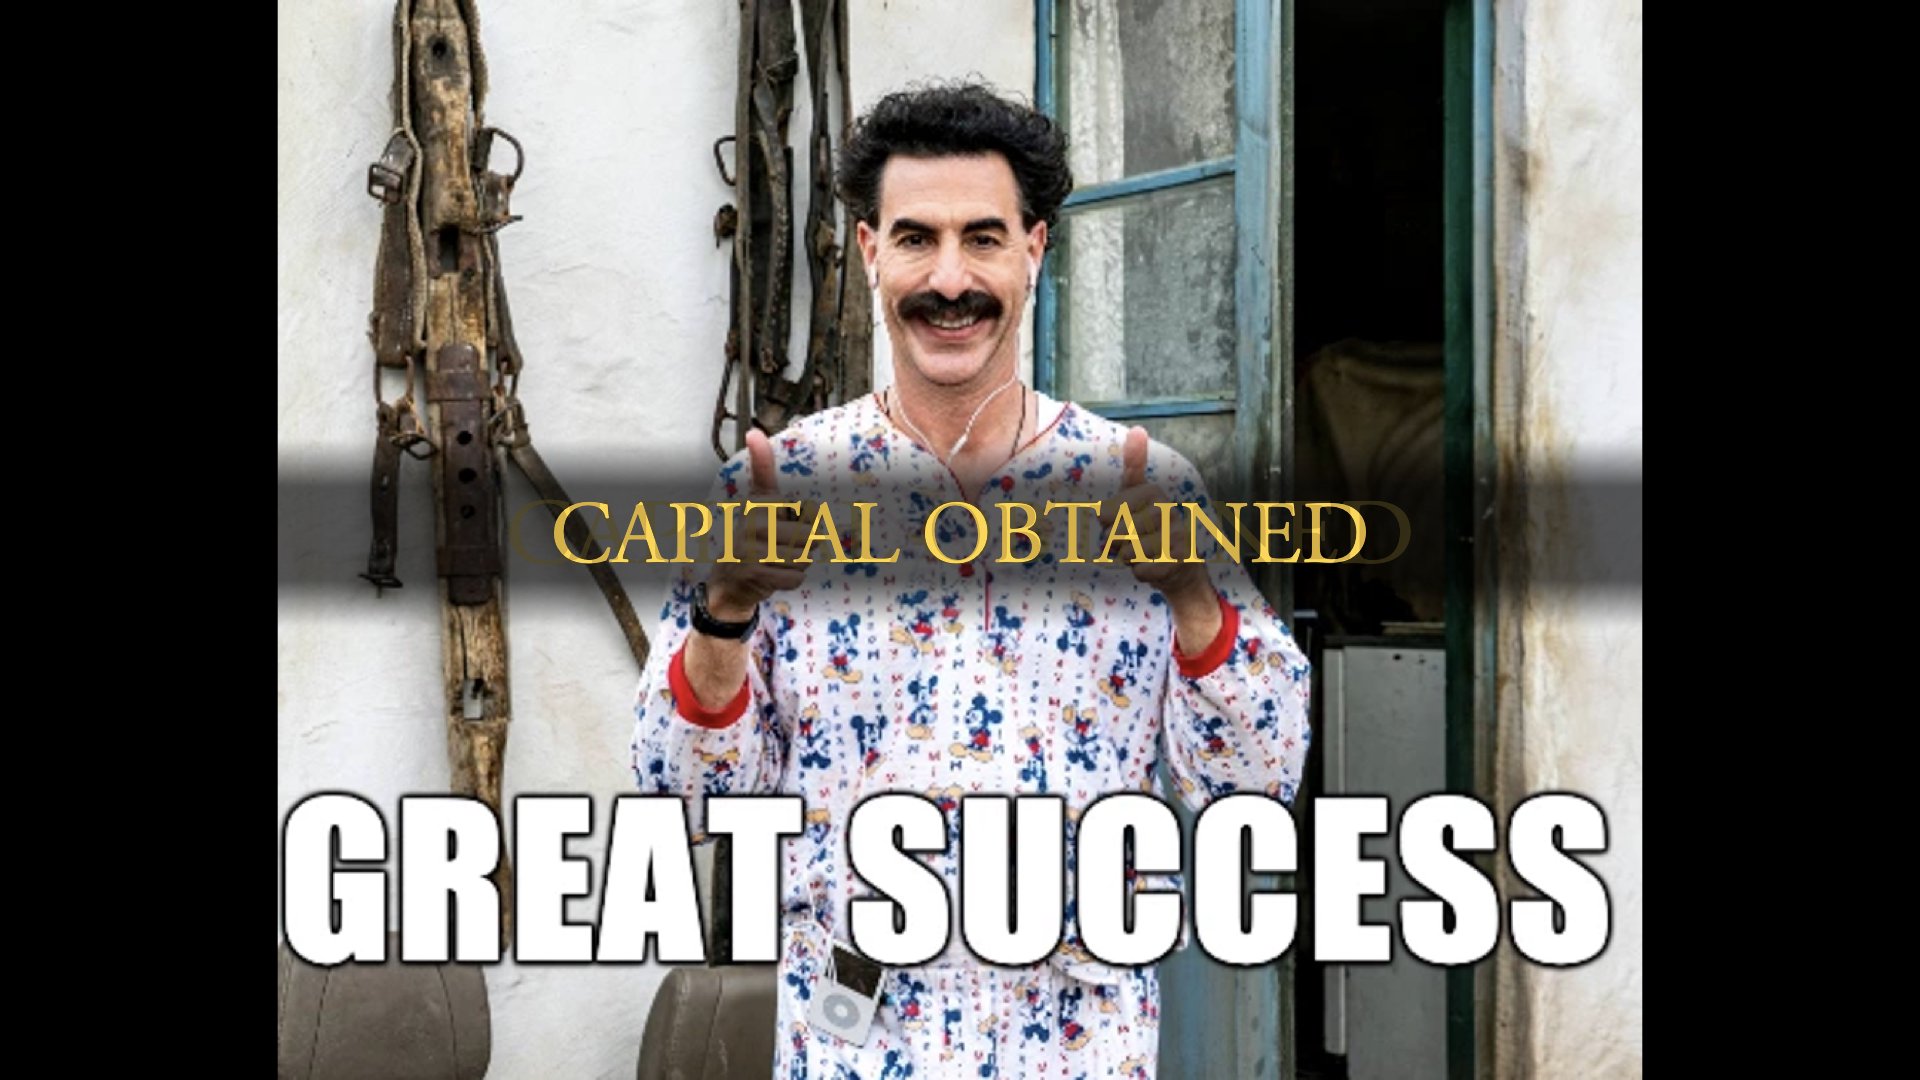 Borat holding two thumbs up with the caption 'Great success'. The words 'Capital obtained' are overlaid on top of the image like in Dark Souls when you kill a boss or something.